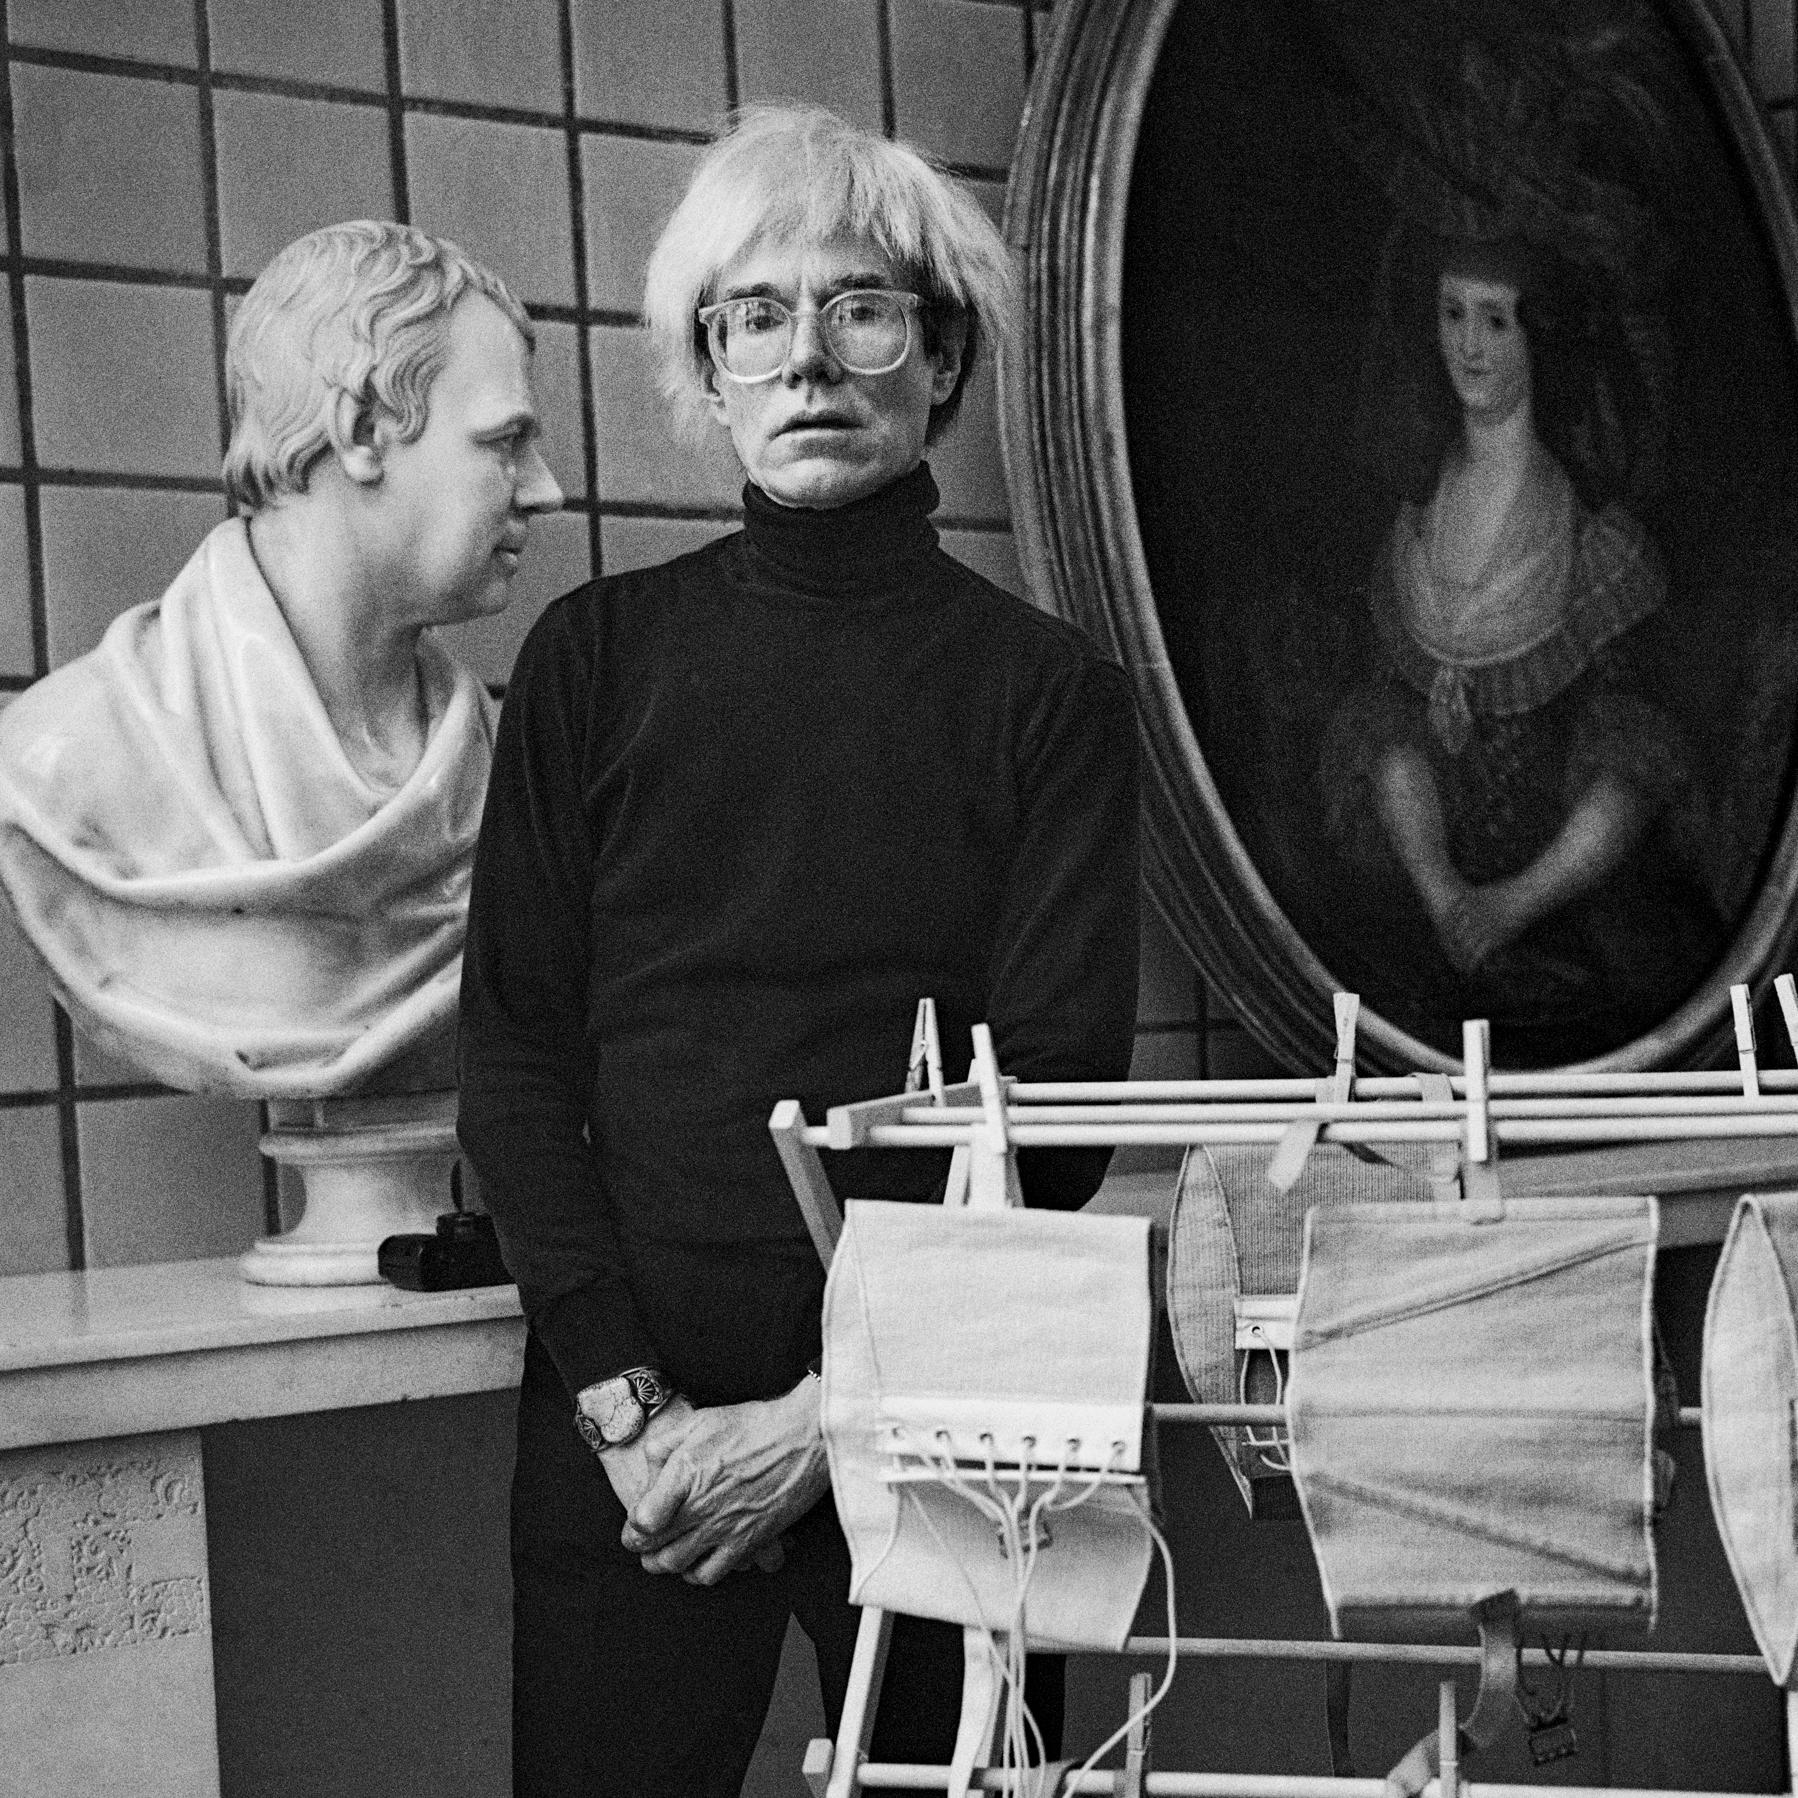 Andy Warhol and his Corsets at the Fourth Factory, New York, 1986
